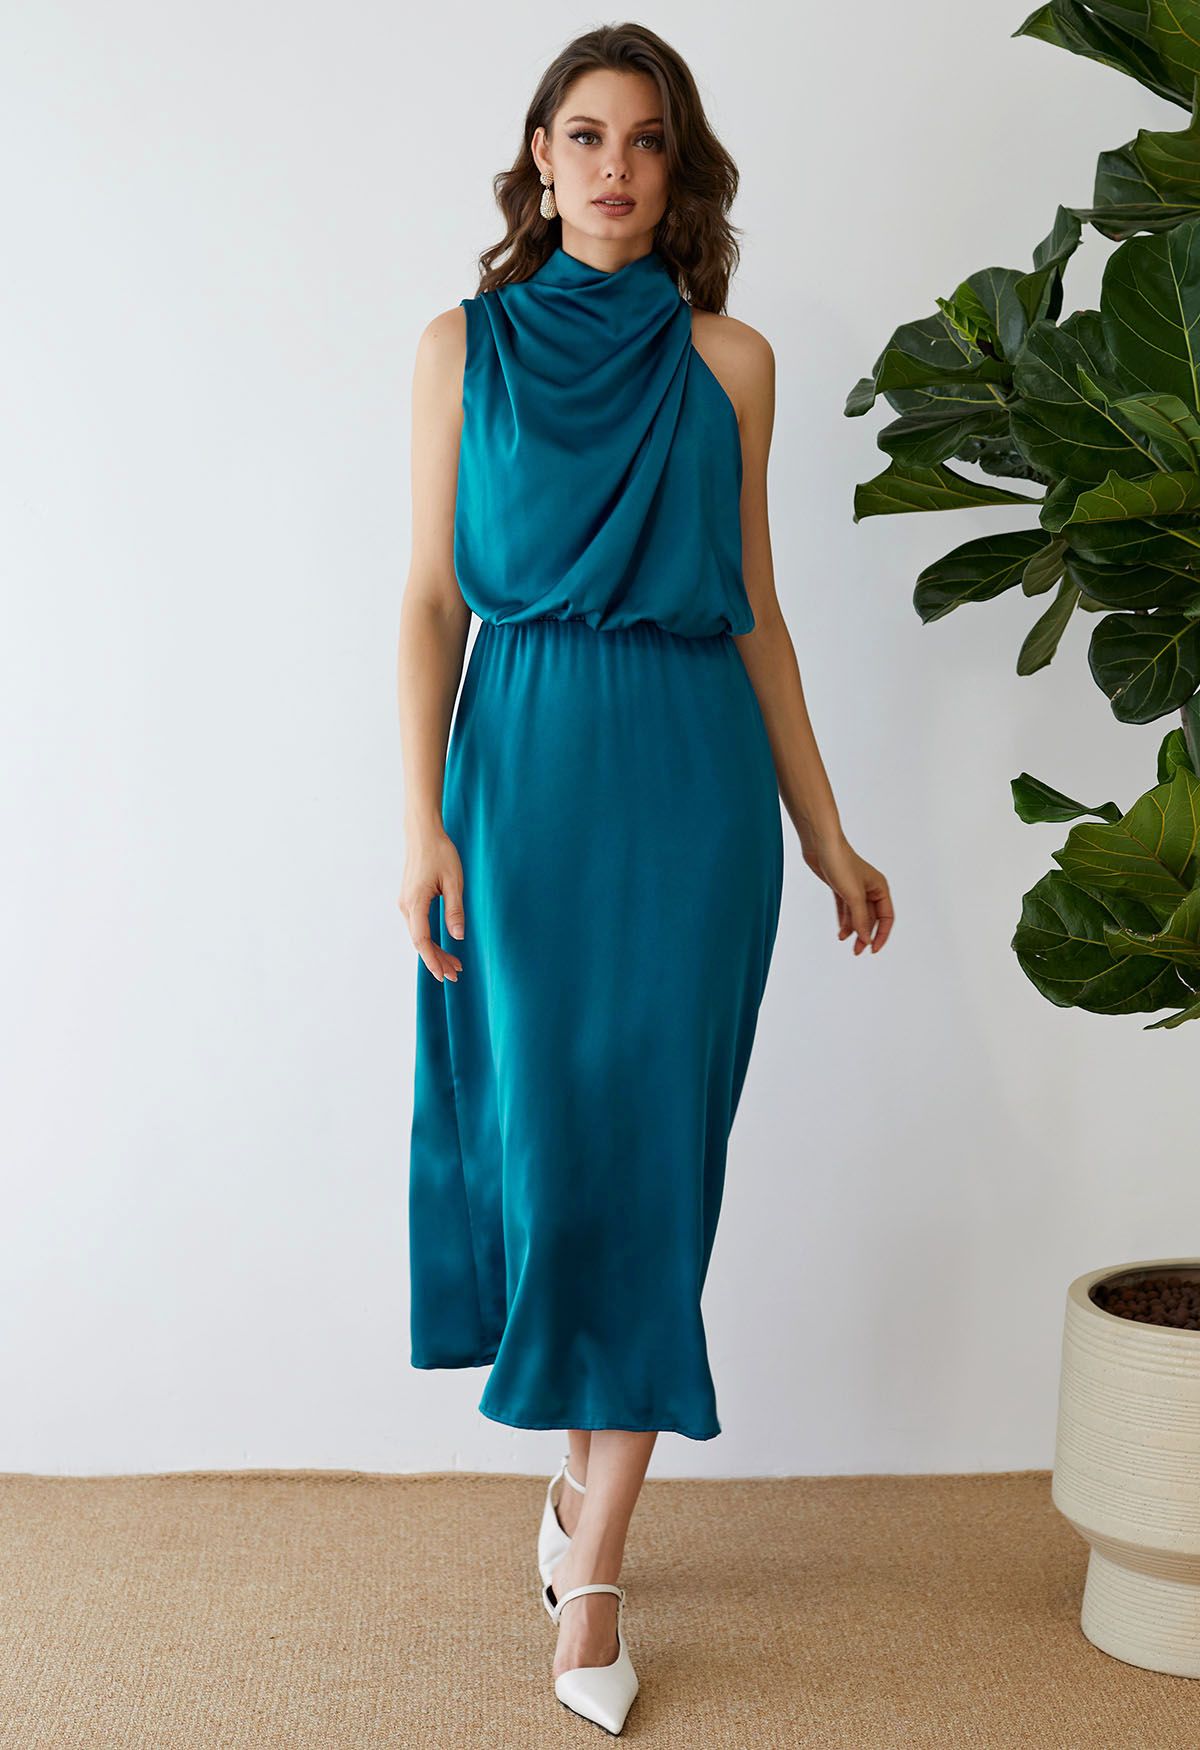 Asymmetric Ruched Neckline Sleeveless Dress in Teal